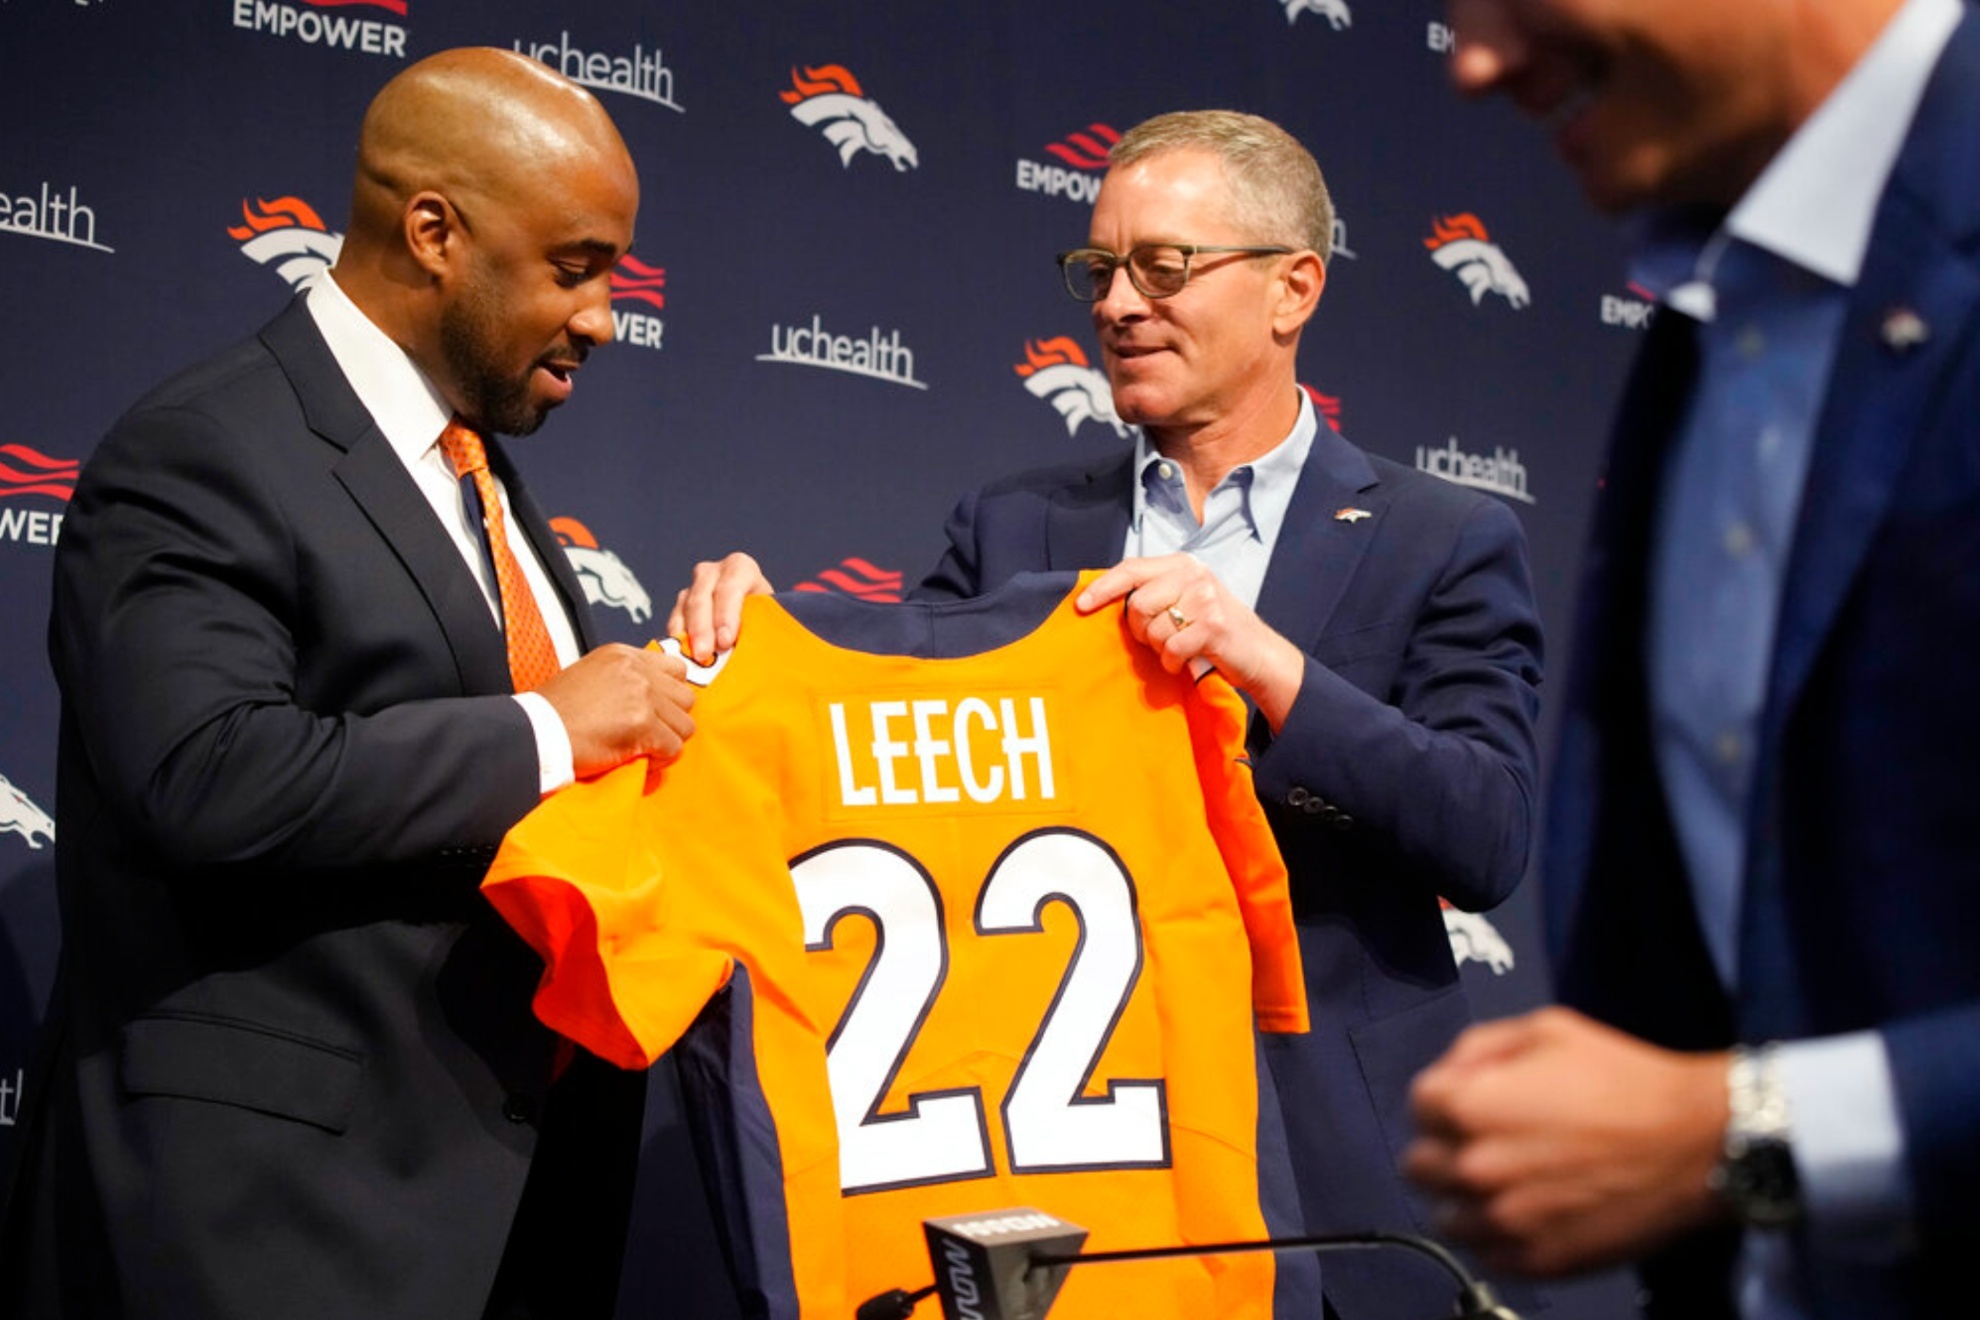 President Damani Leech (L) accepts a jersey from Greg Penner in 2022.